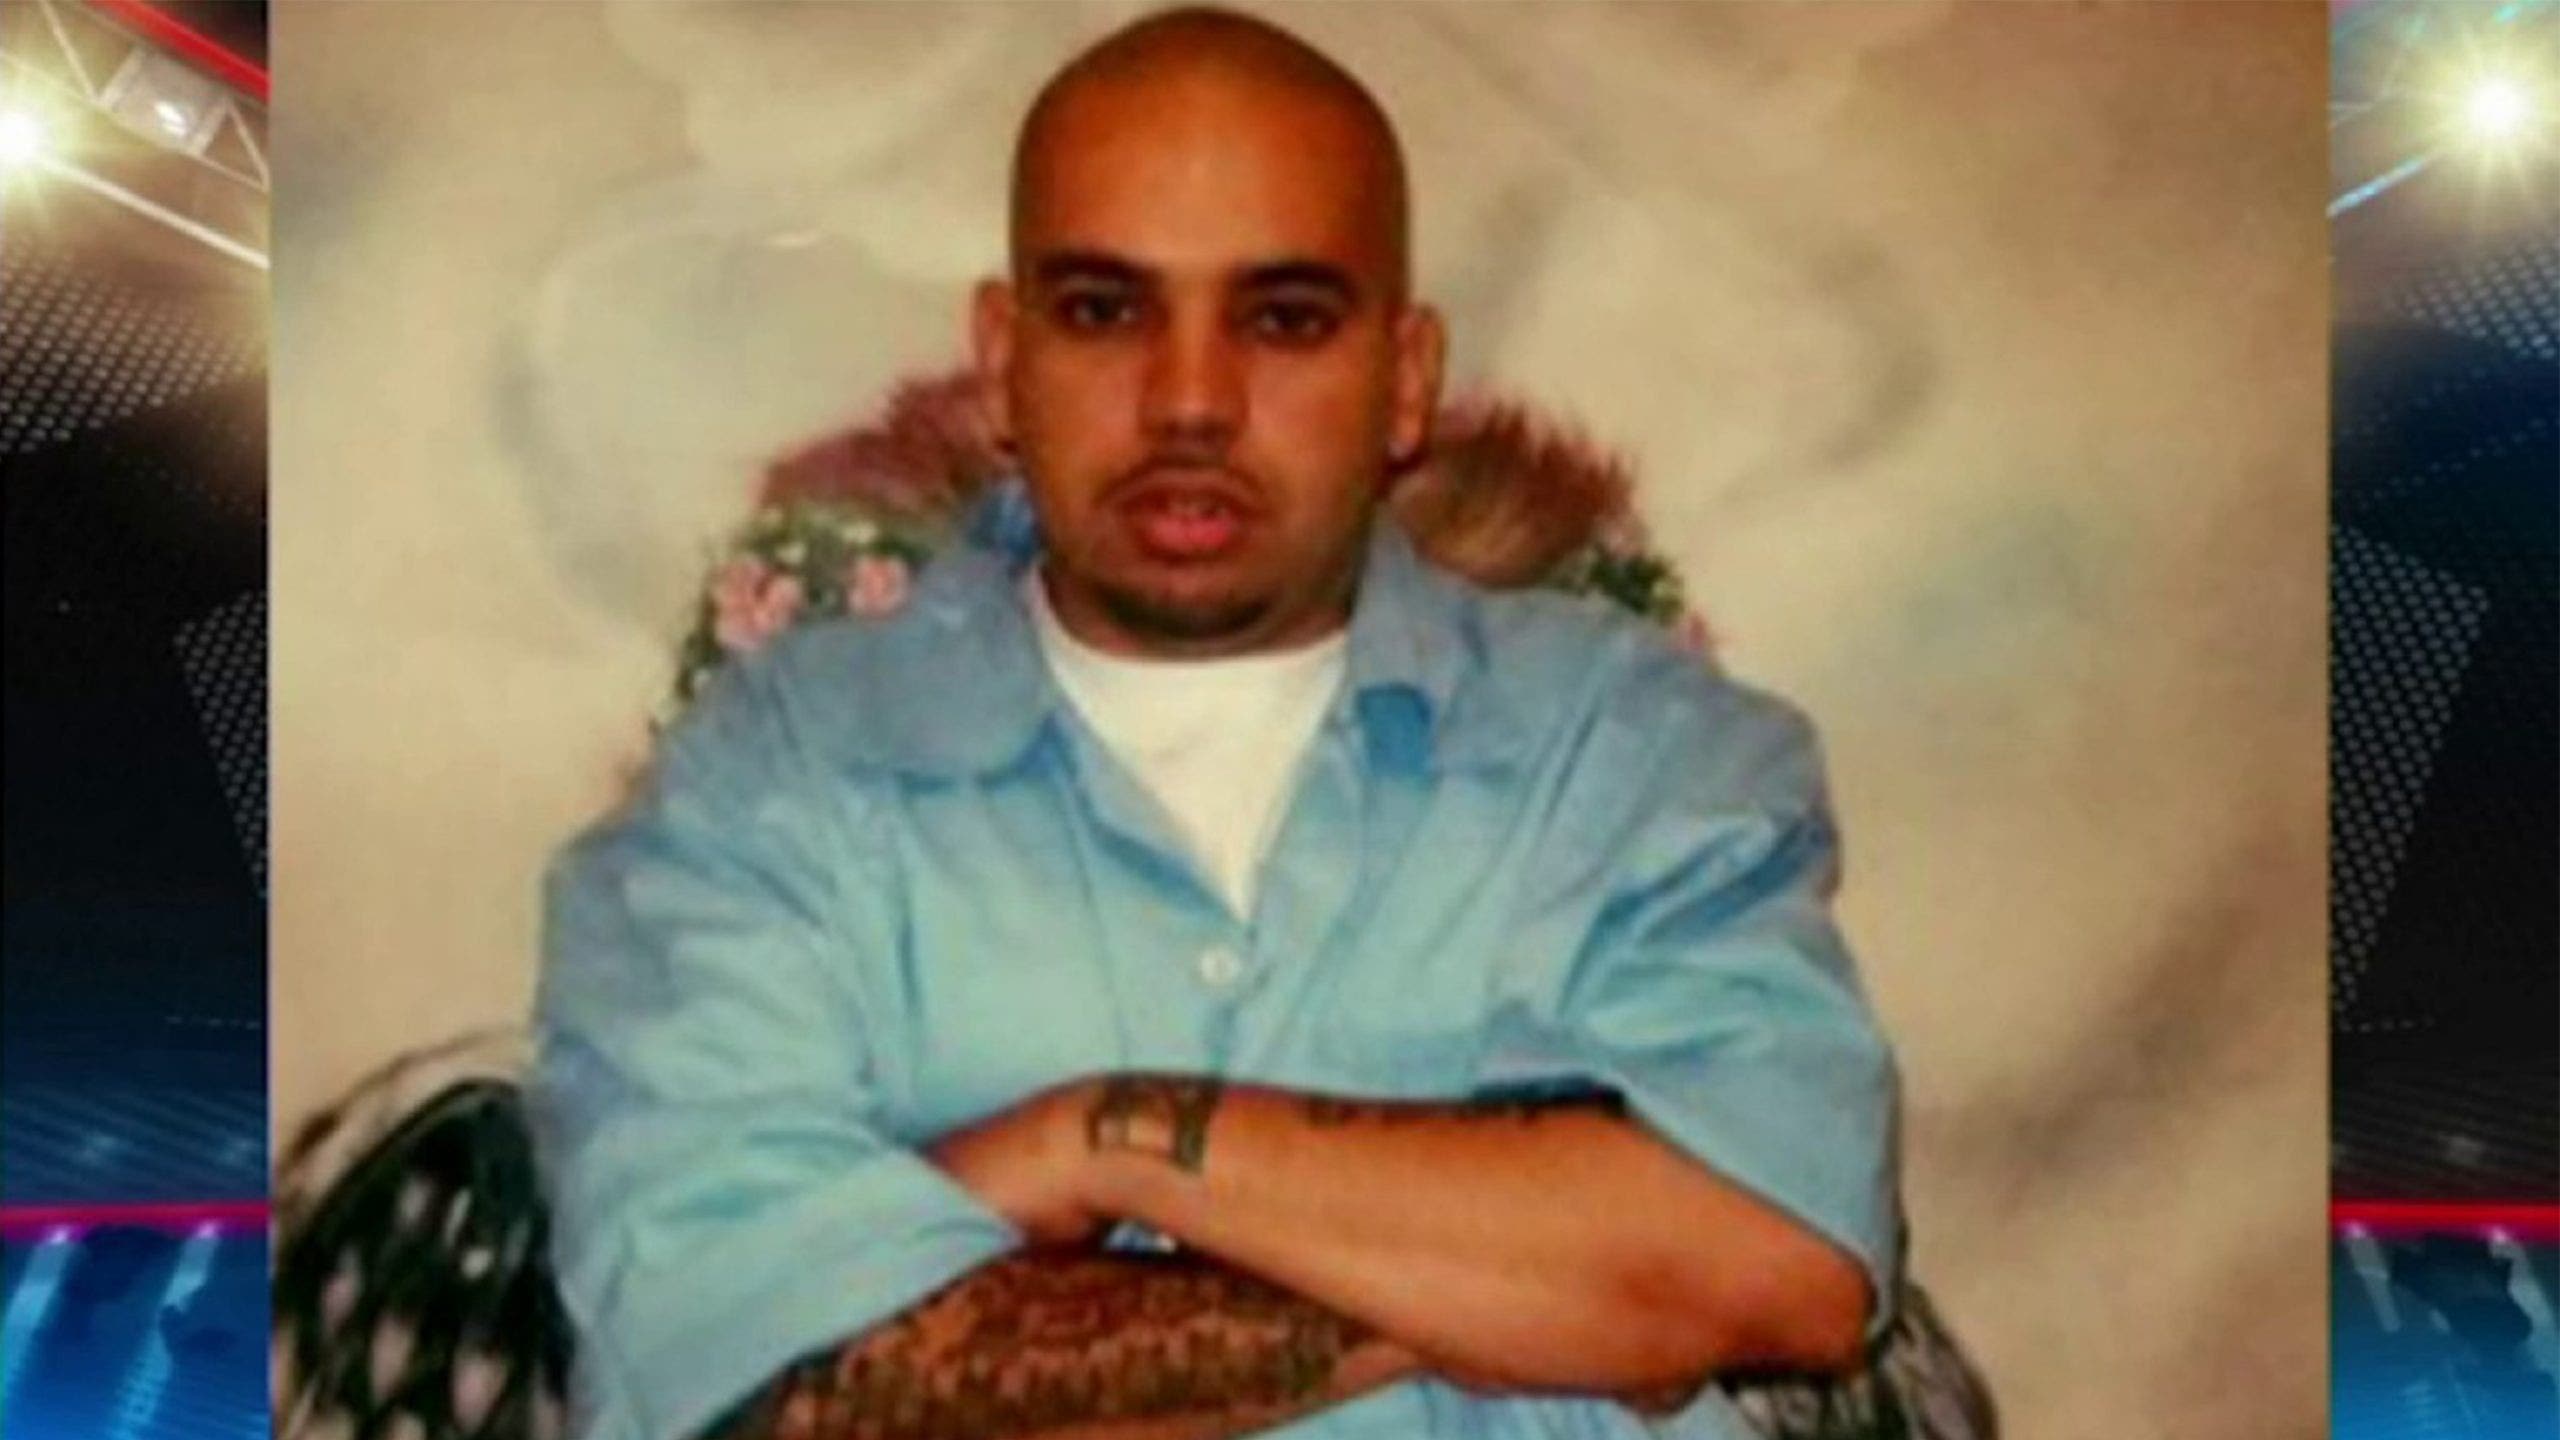 Ex-Latin Kings gang member finds new calling as Christian minister: ‘Glory to God’ [Video]